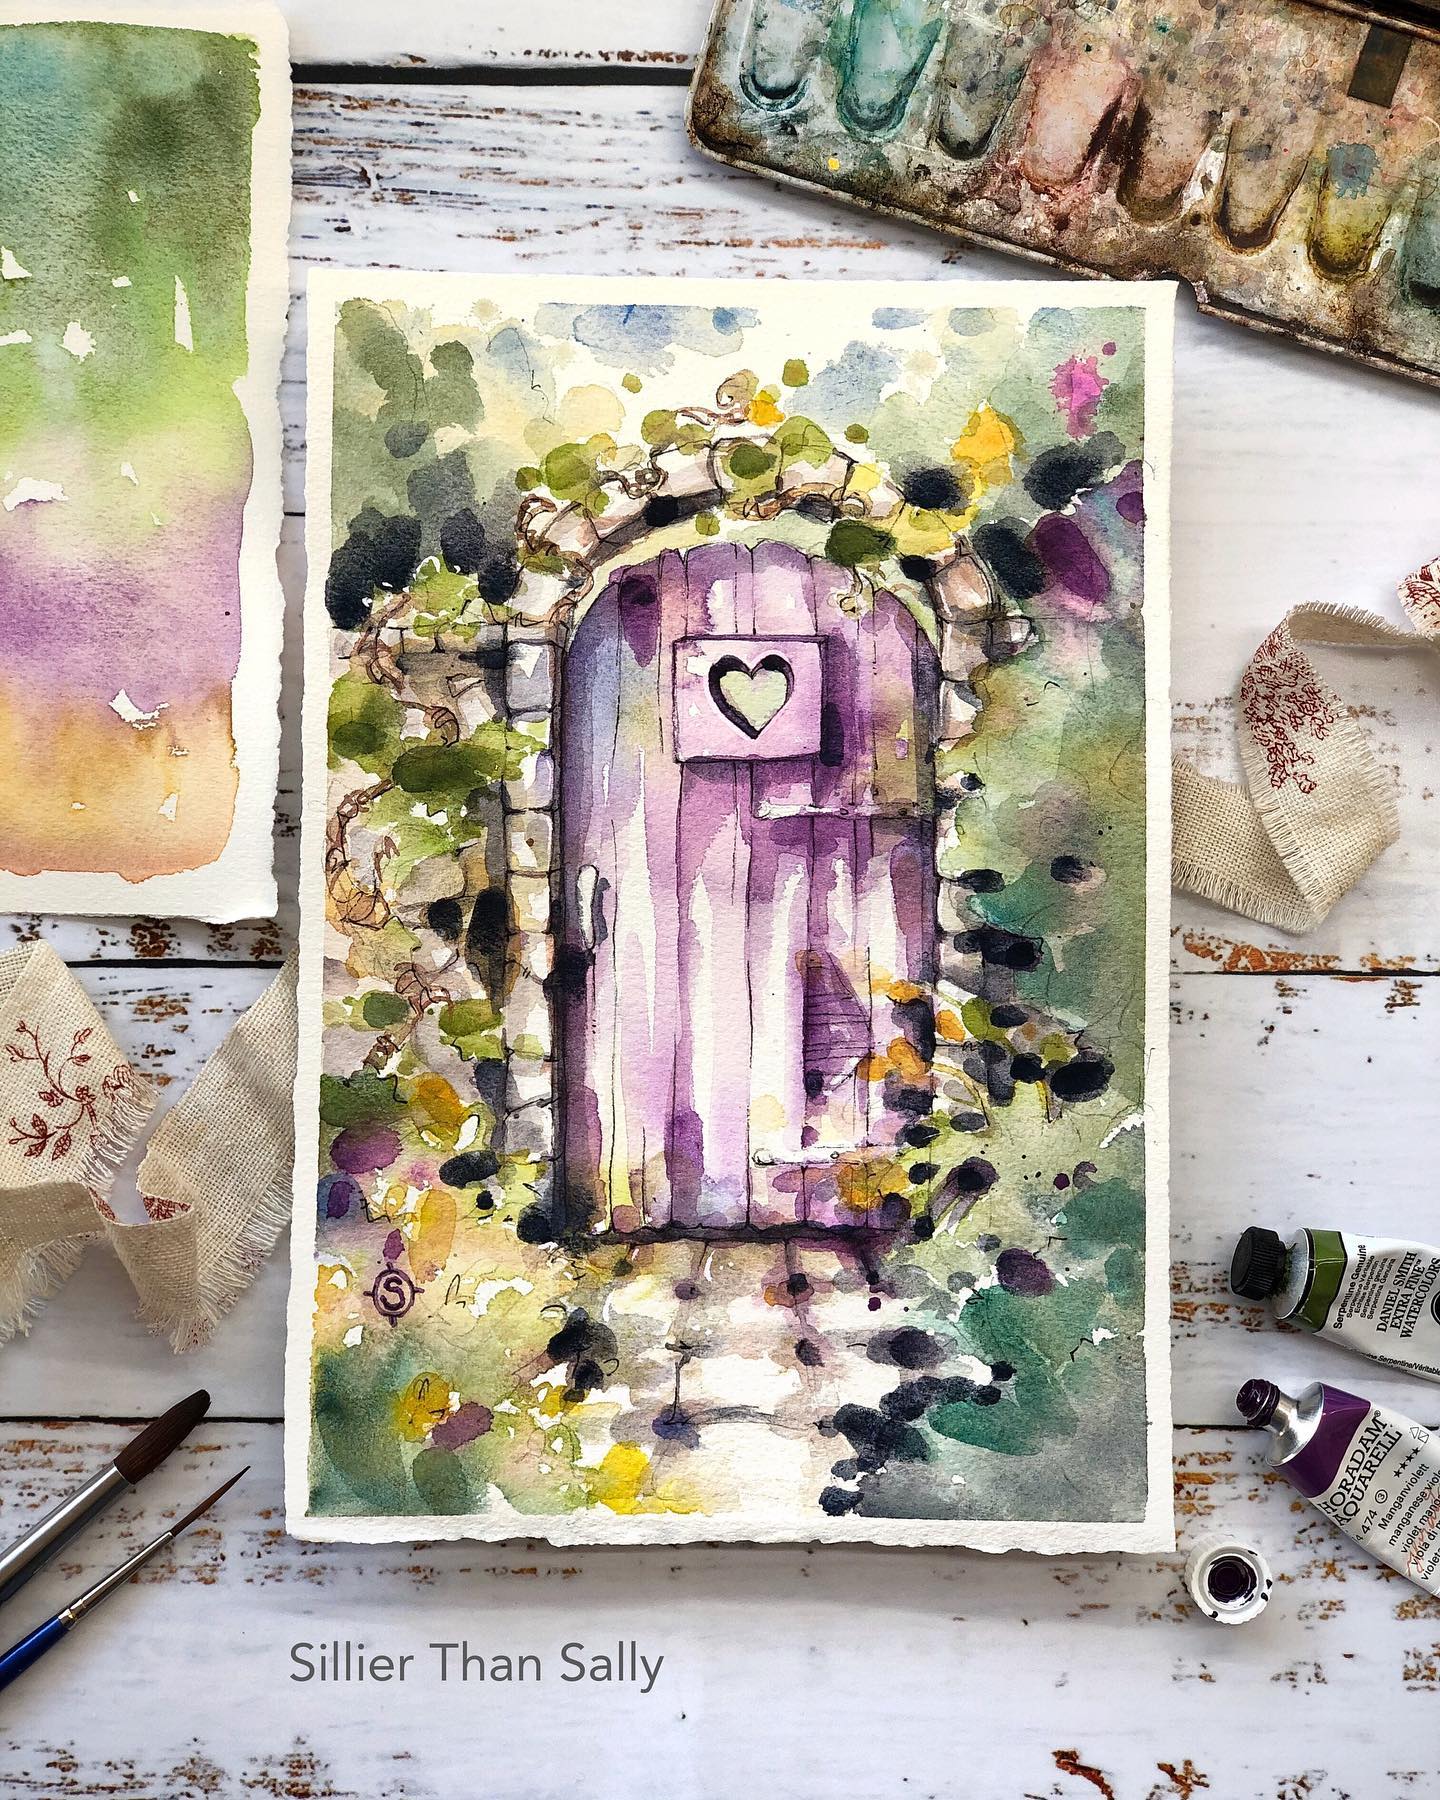 watercolour painting purple arched doorway, garden gate, flowers, architecture